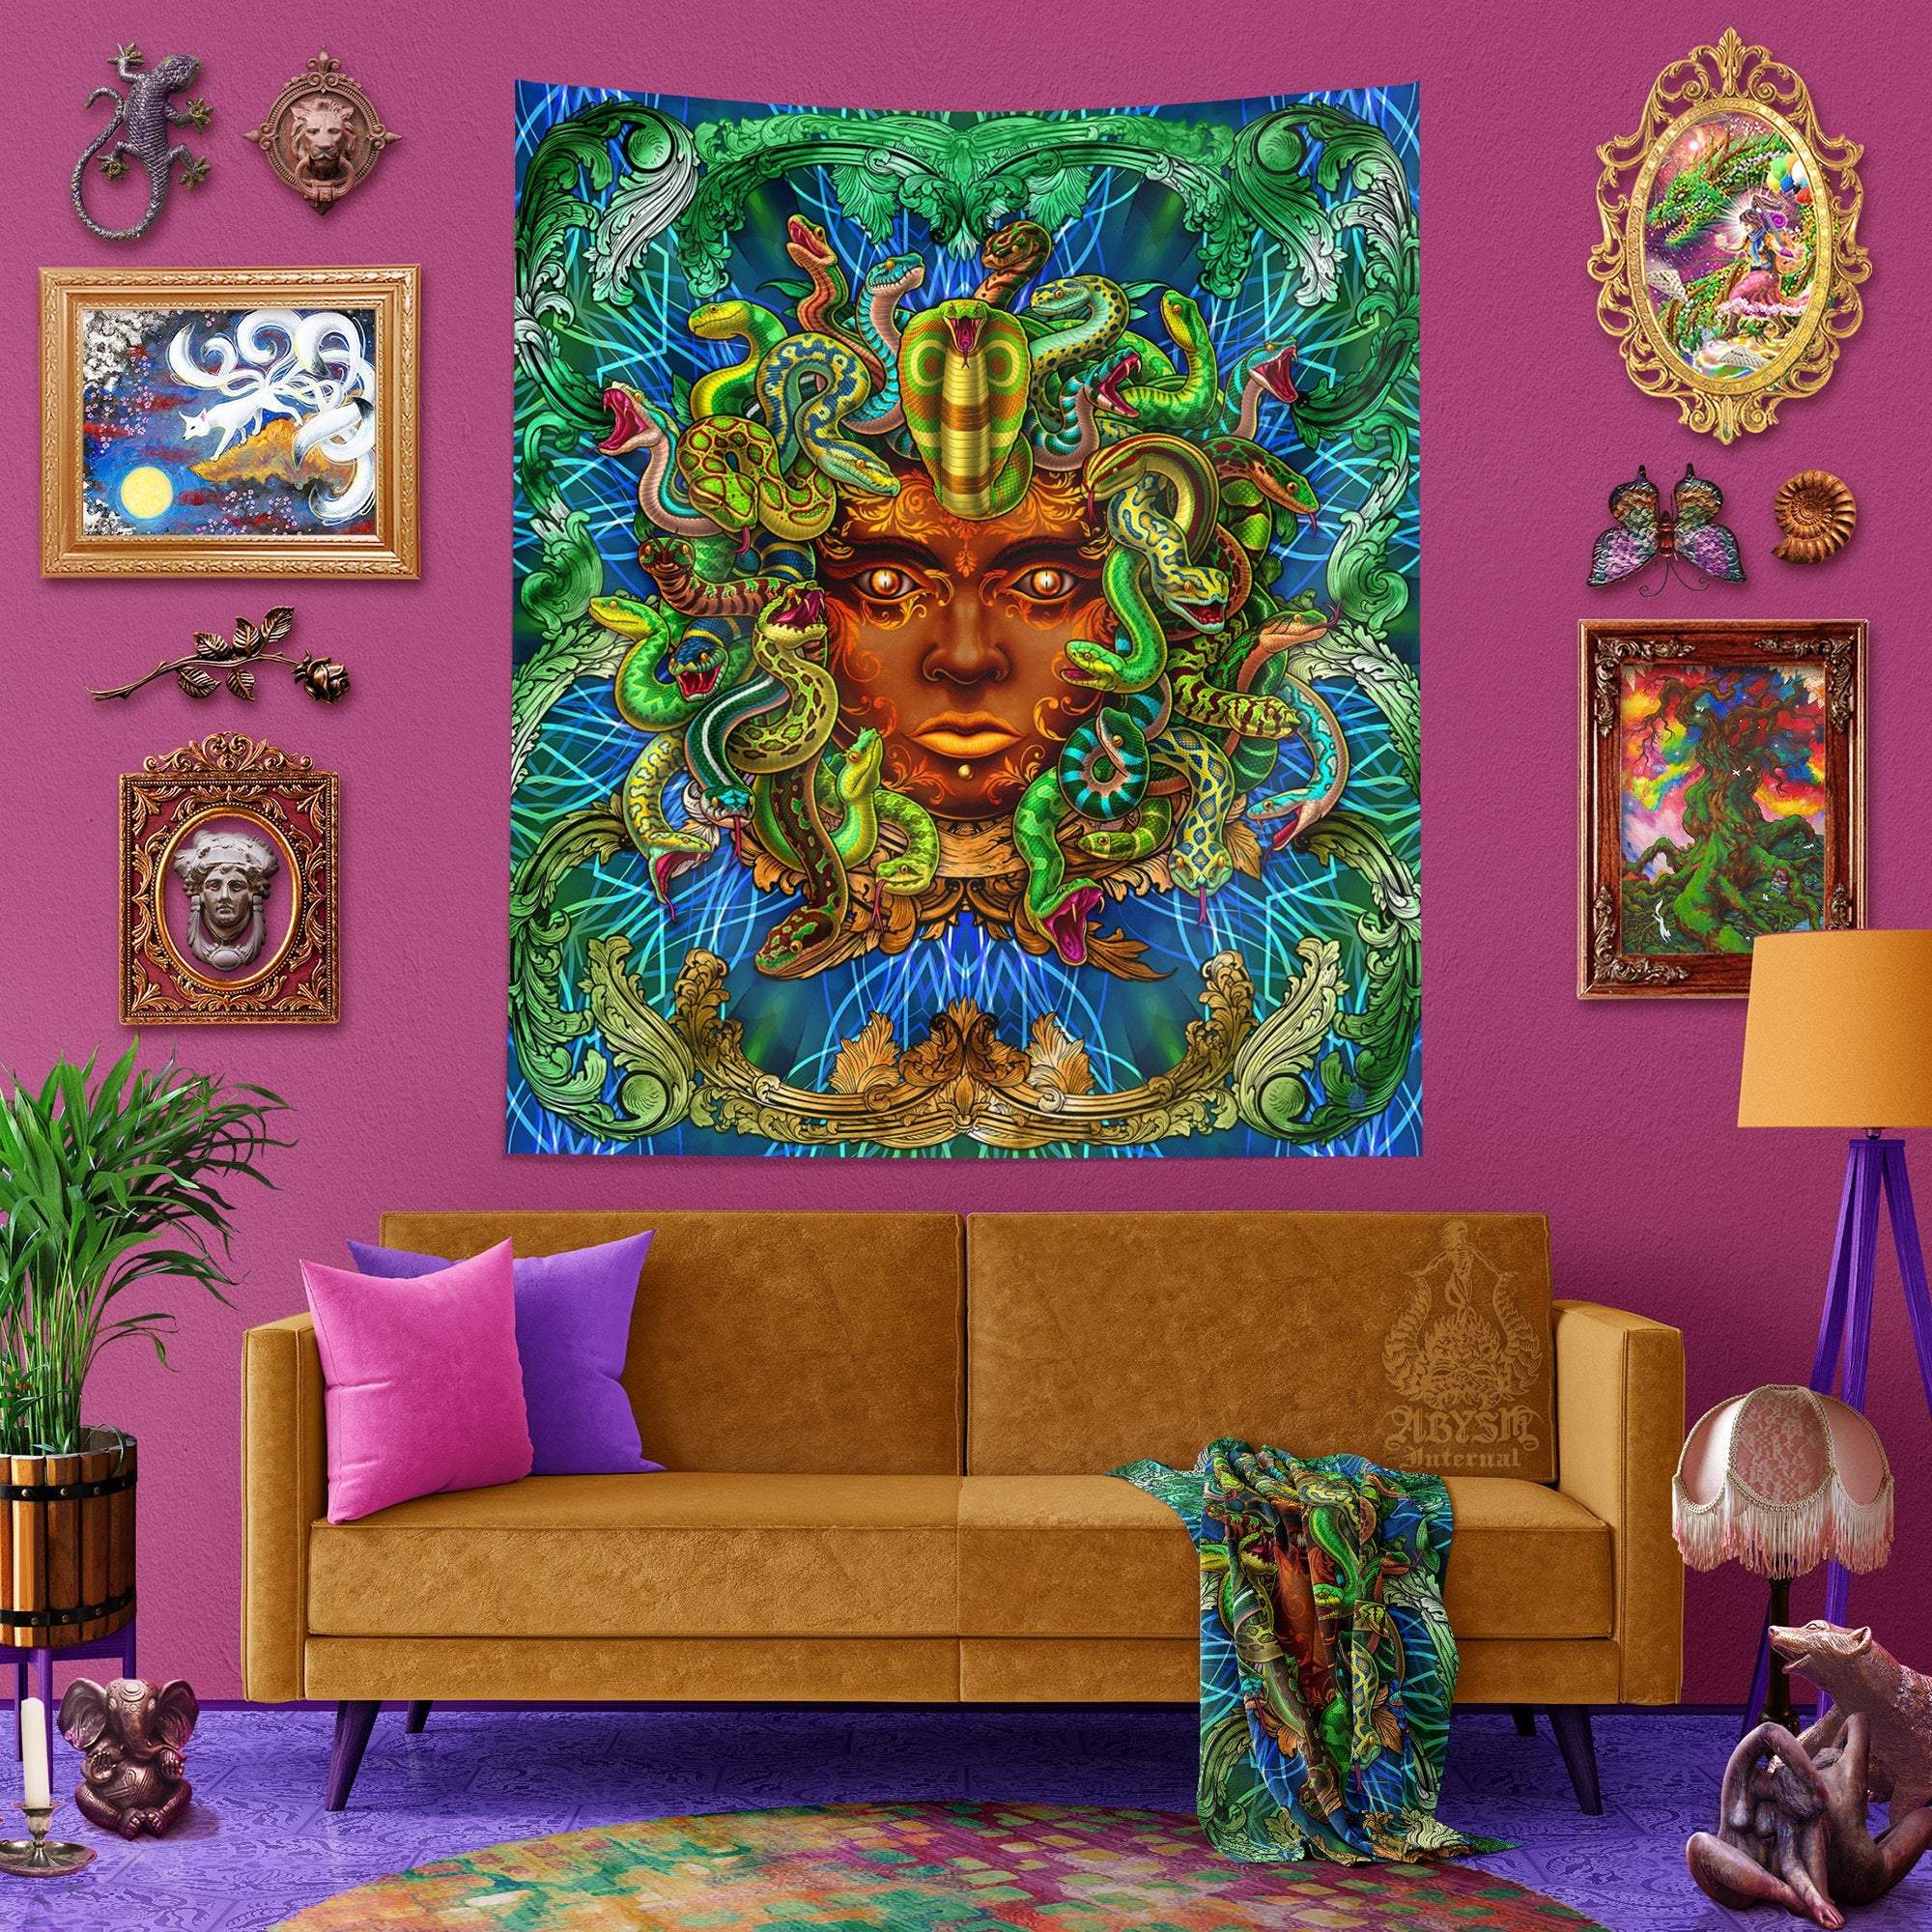 Medusa Tapestry, Nature Wall Hanging, Eclectic Home Decor, Art Print, Eclectic and Funky - Green Snakes - Abysm Internal